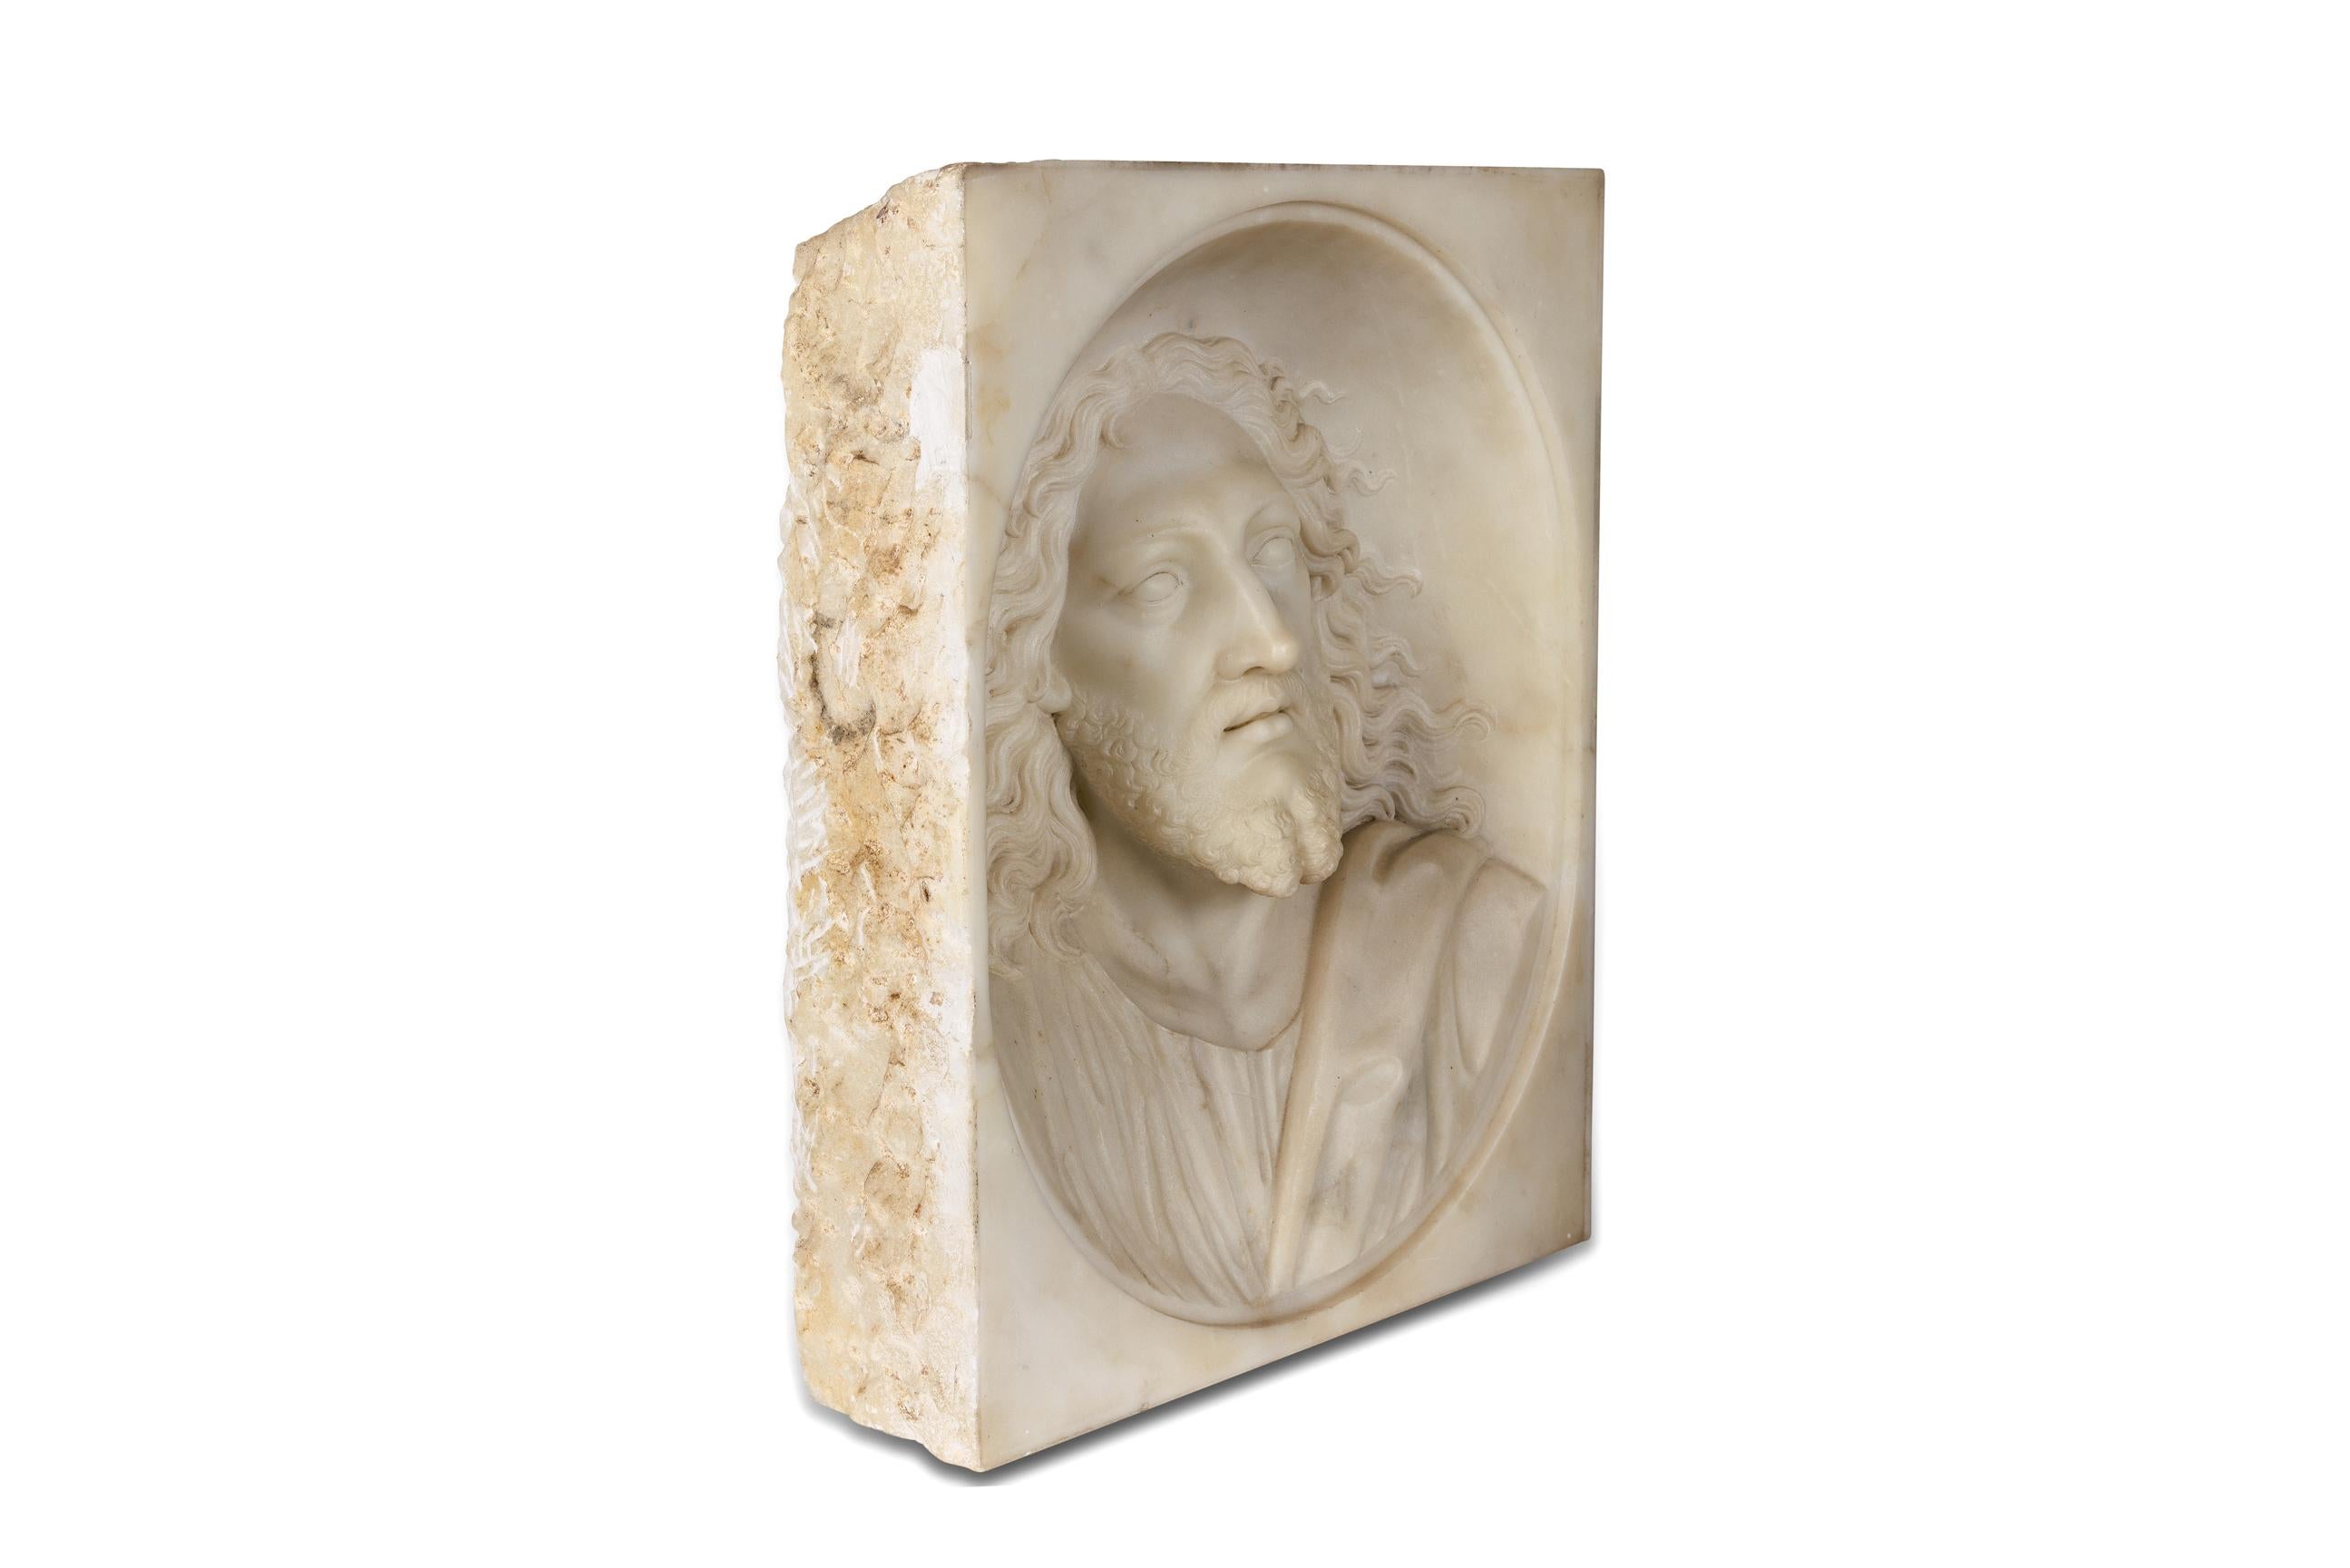 Rare and Important Italian White Marble Bust Sculpture of Jesus Christ, C. 1850 For Sale 1